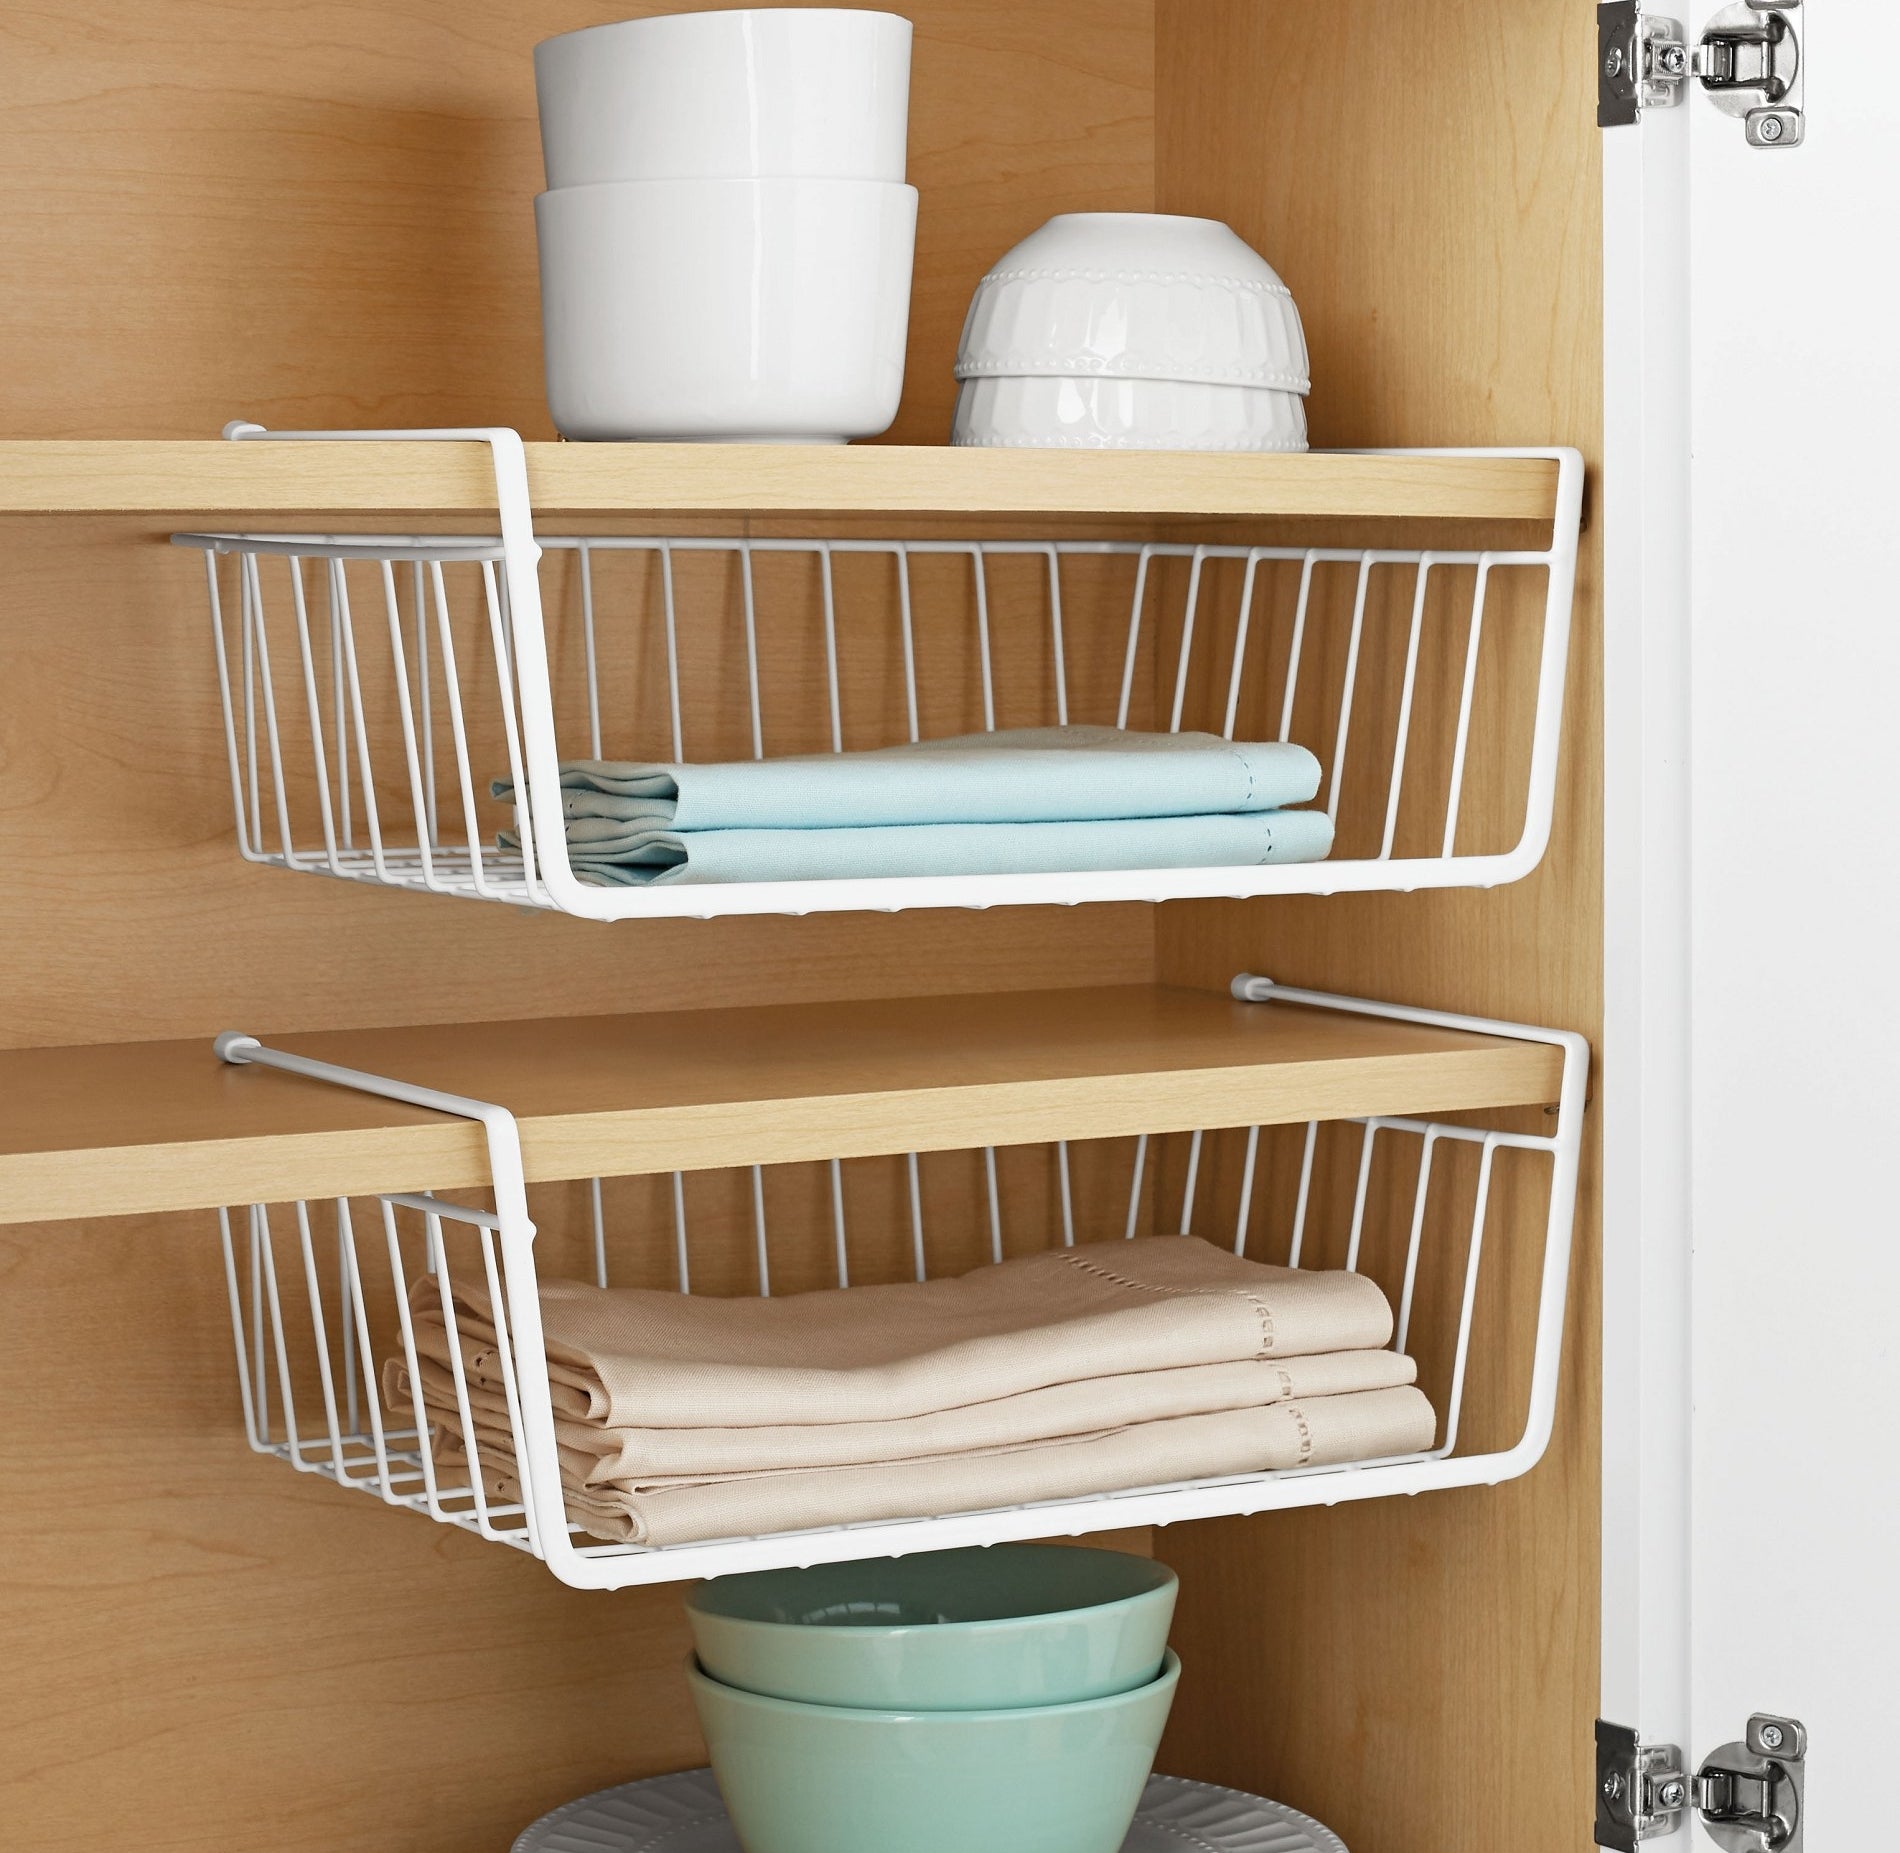 The baskets hung from cabinet shelves